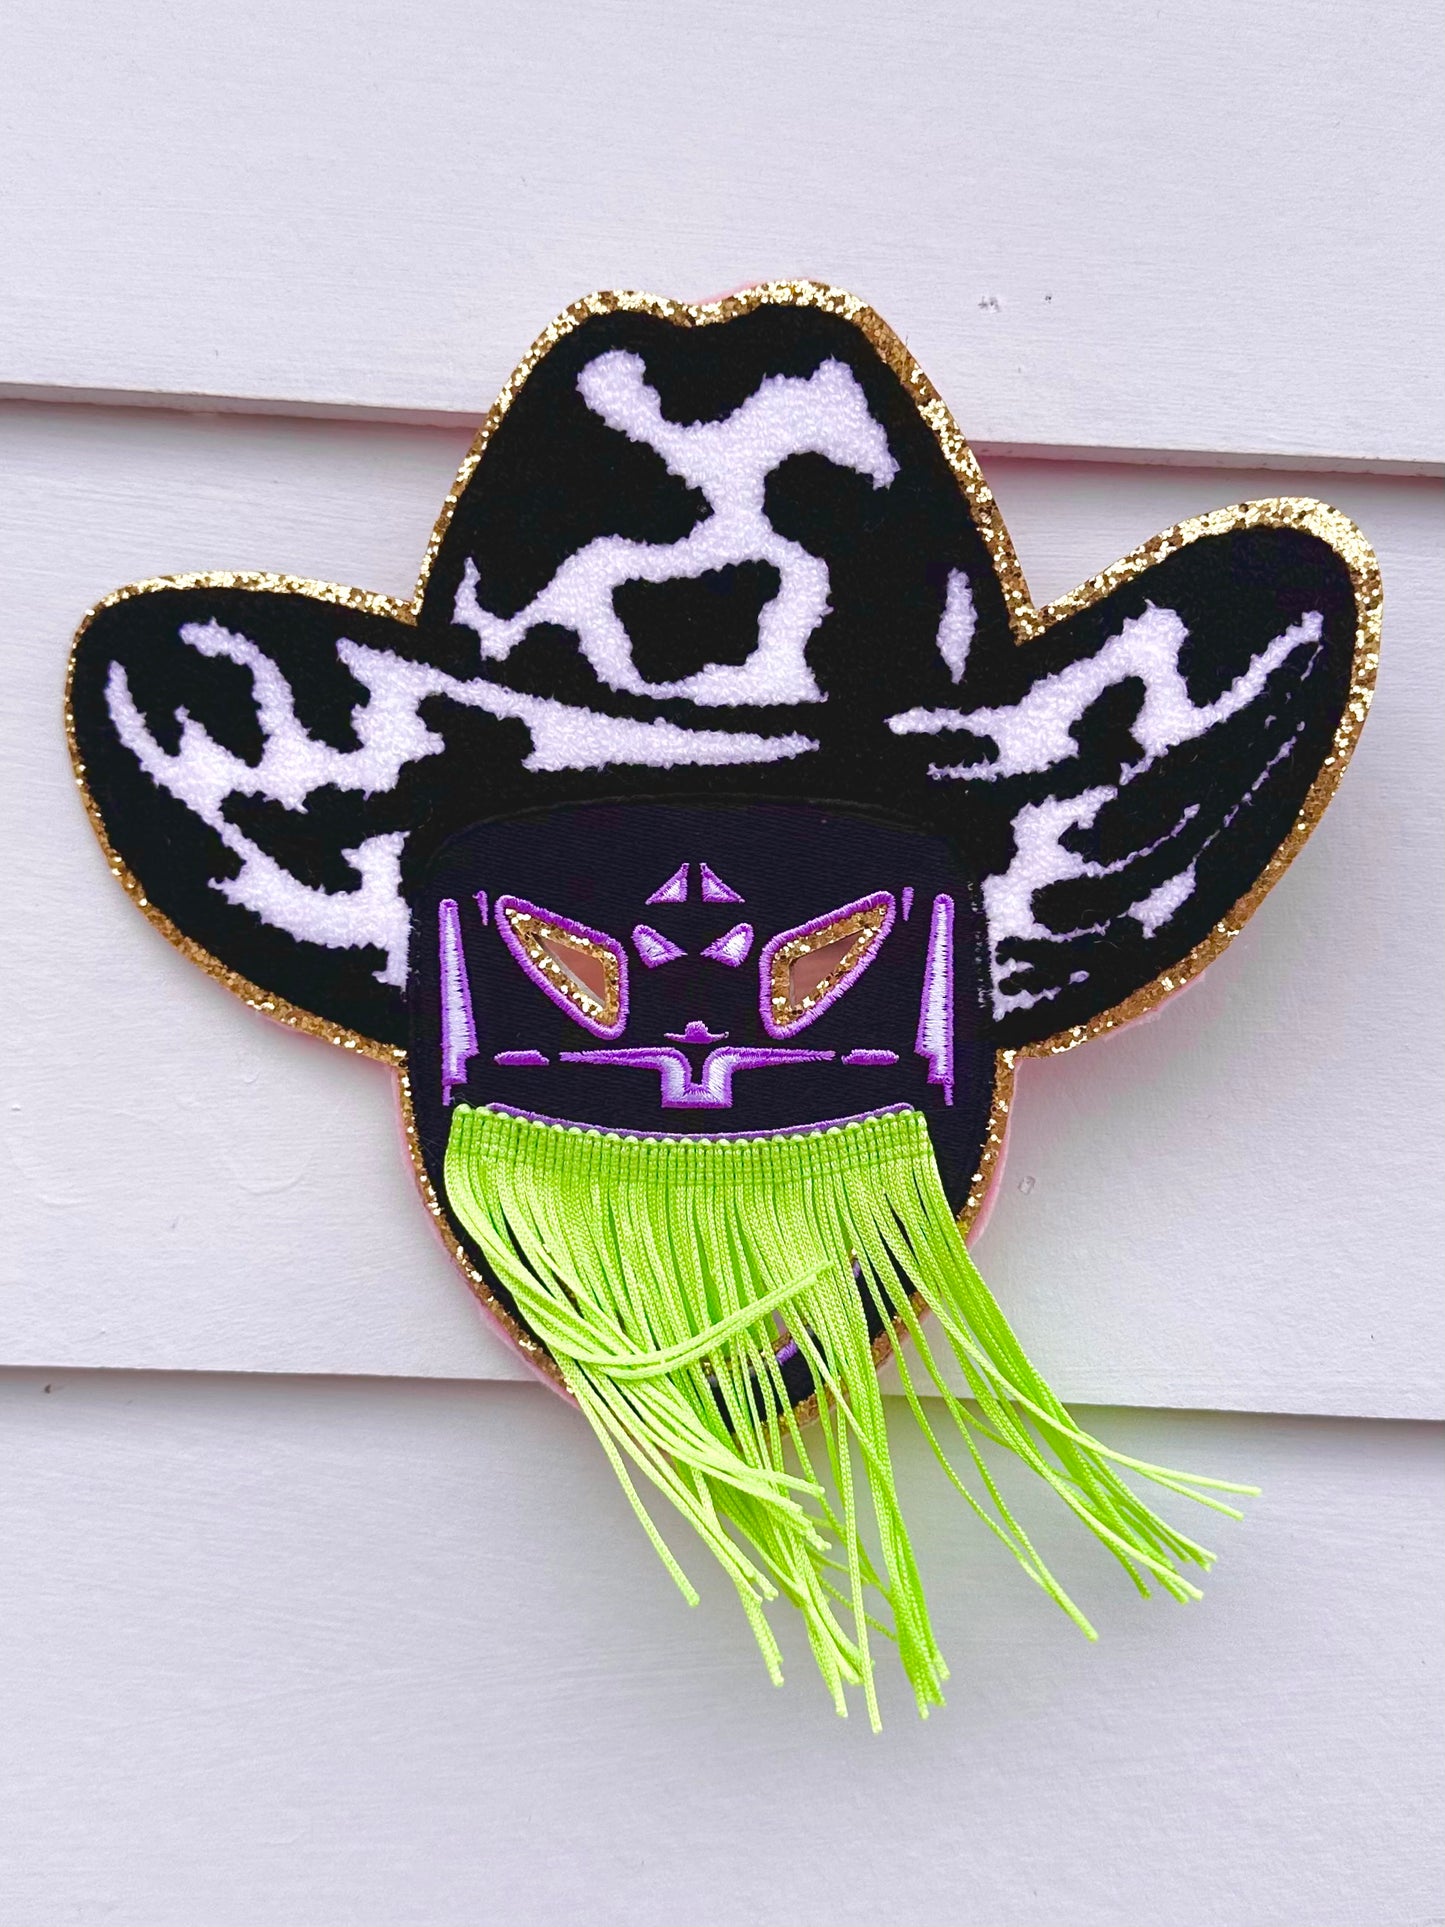 Orville Peck Mini Mirror with Green Fringe & Glitter by Chrissy Crater Moon Soft Goods